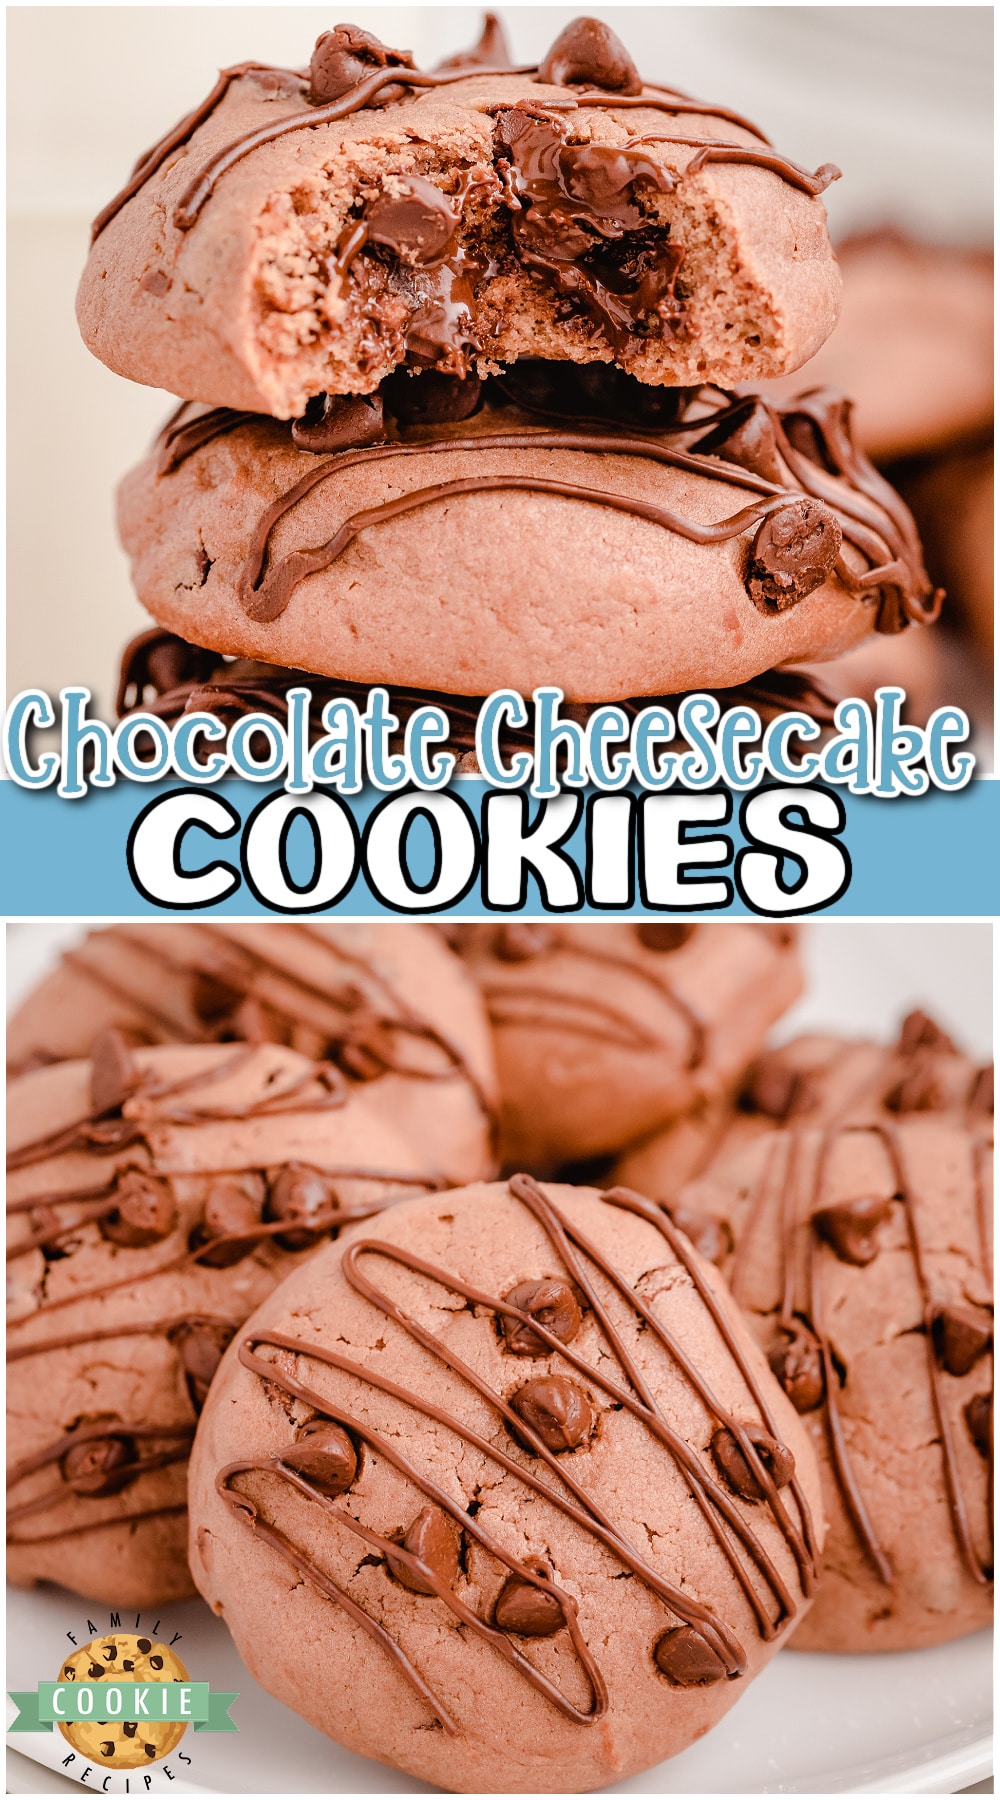 Chocolate Cheesecake Cookies made with cream cheese & chocolate! Everything you love about cheesecake, in cookie form! Soft & chewy cheesecake cookies with 2x the chocolate!